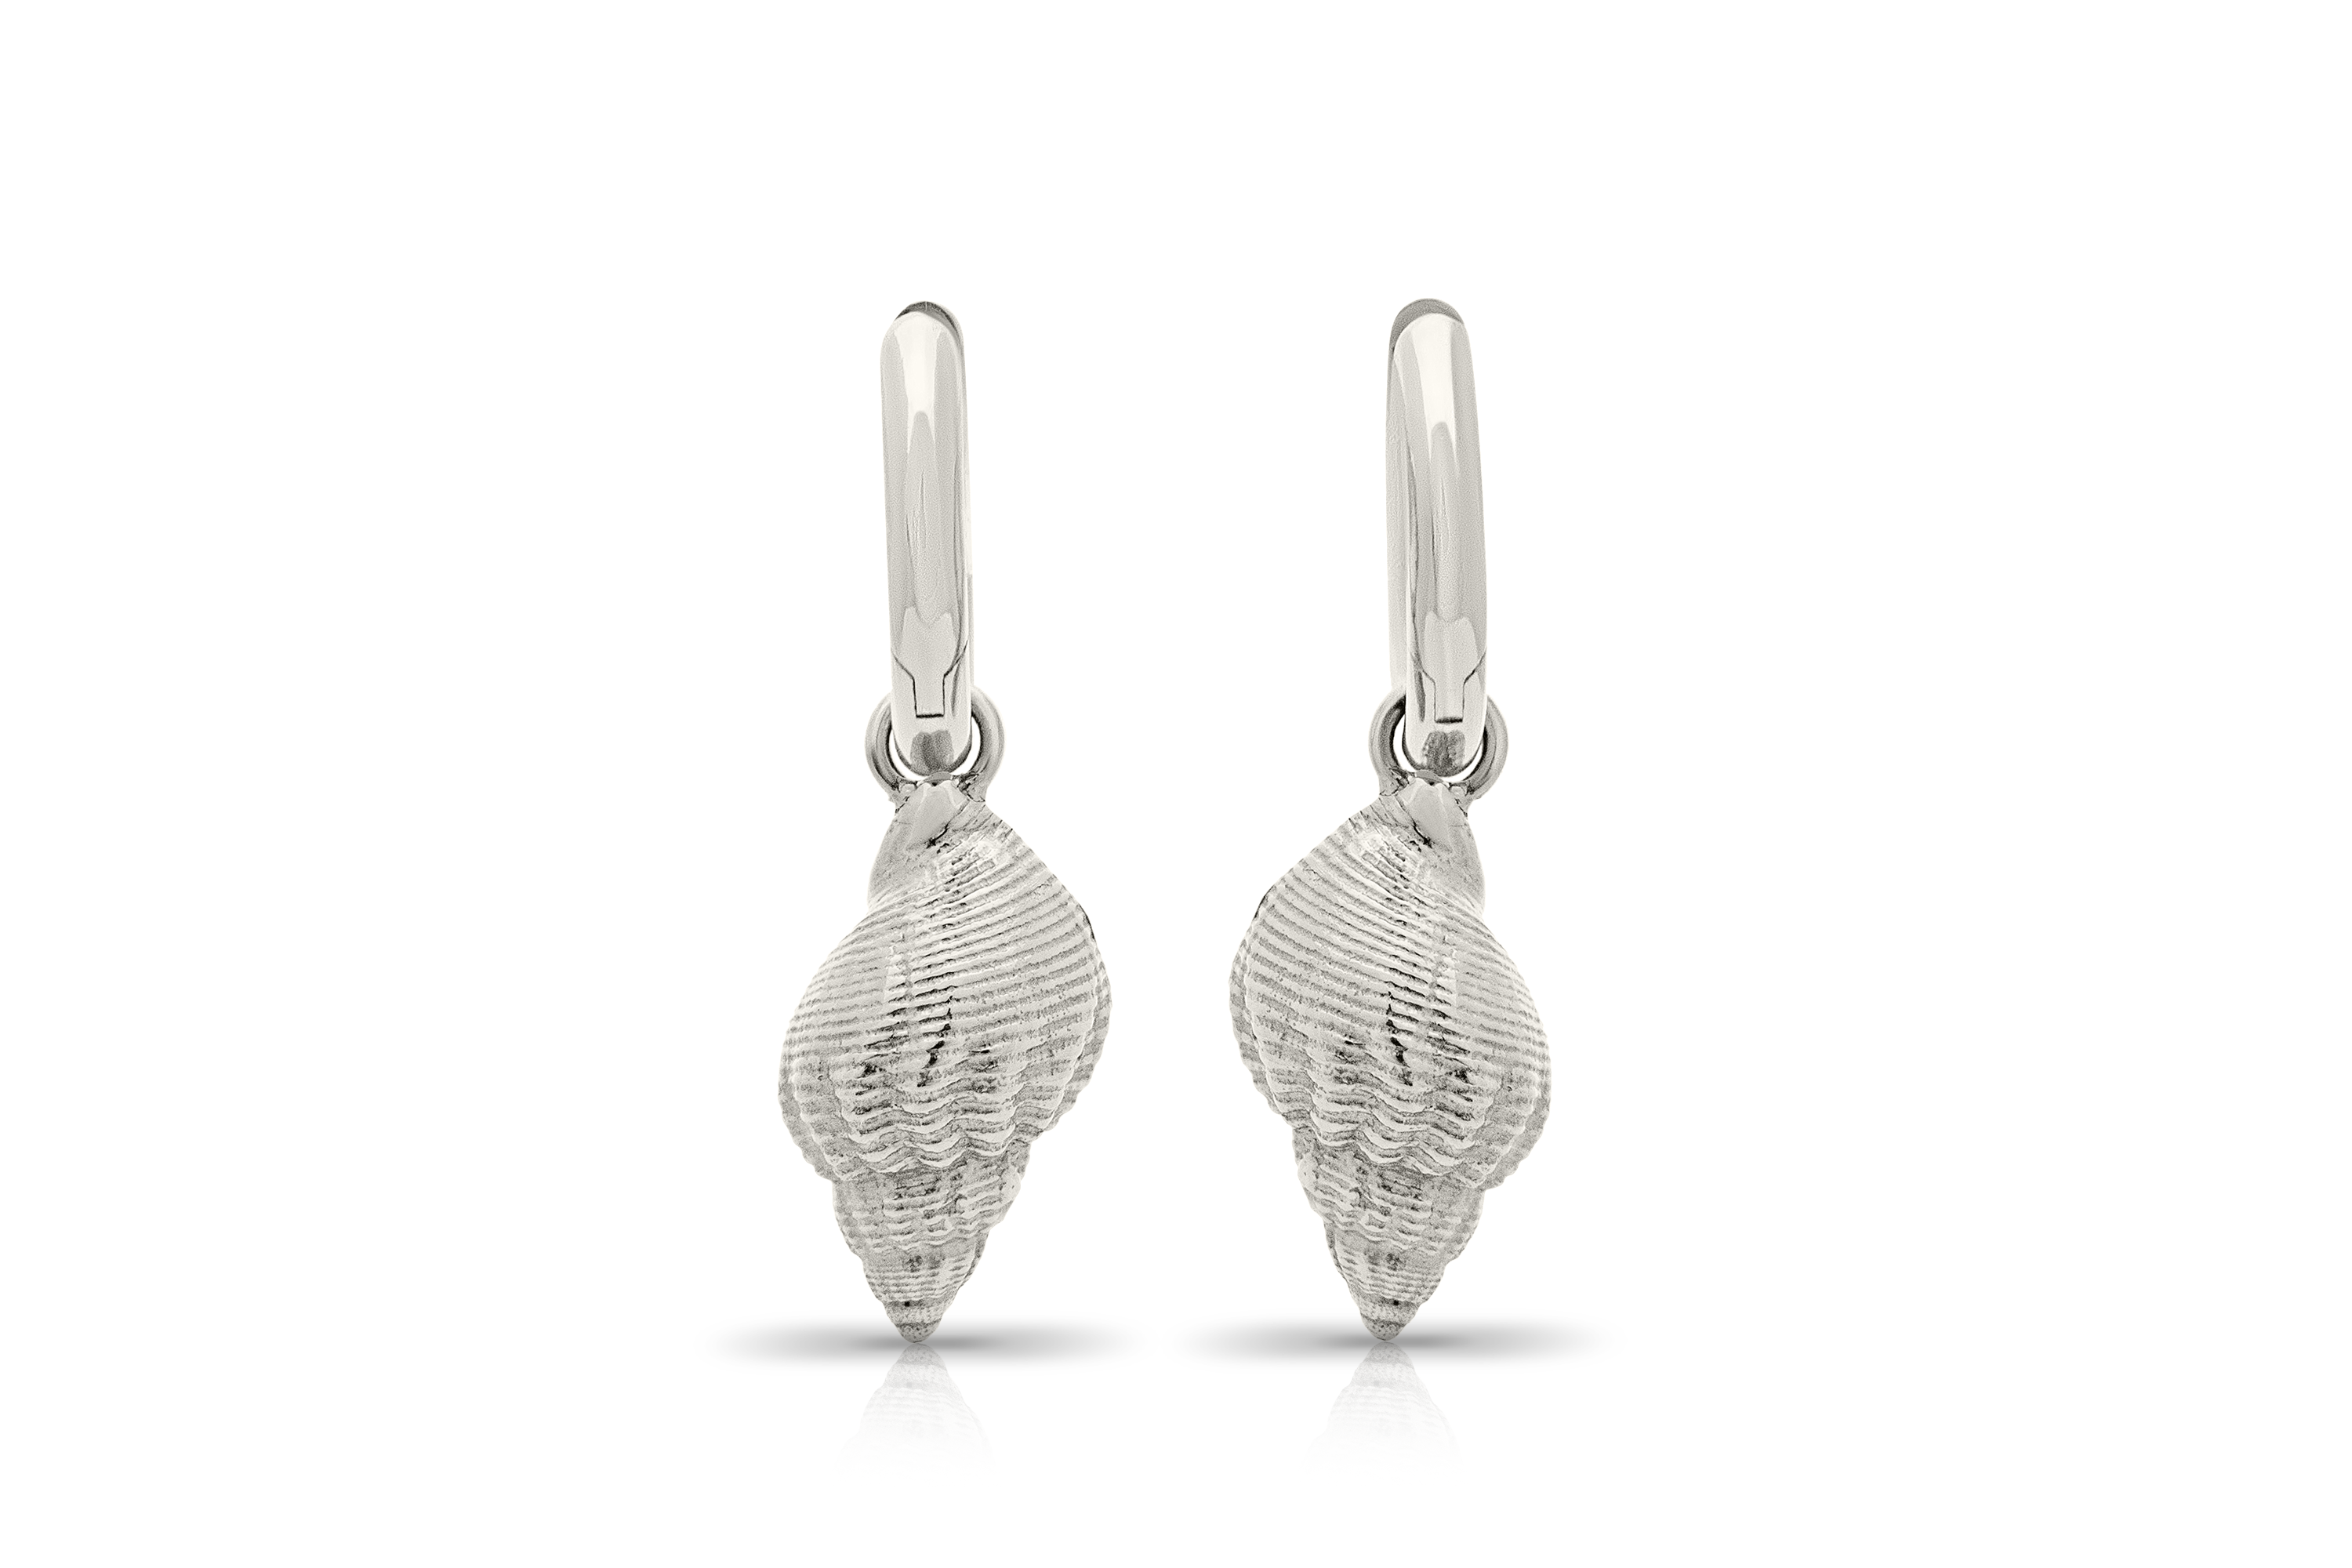 West Wittering earrings. West Wittering shell. Whelk shell jewellery. Whelk shell earrings. West Wittering jewellery. Chichester jewellery. Shell earrings. Silver shell jewellery. Gold shell jewellery. Those Happy Places. Serena Ansell Jewellery.